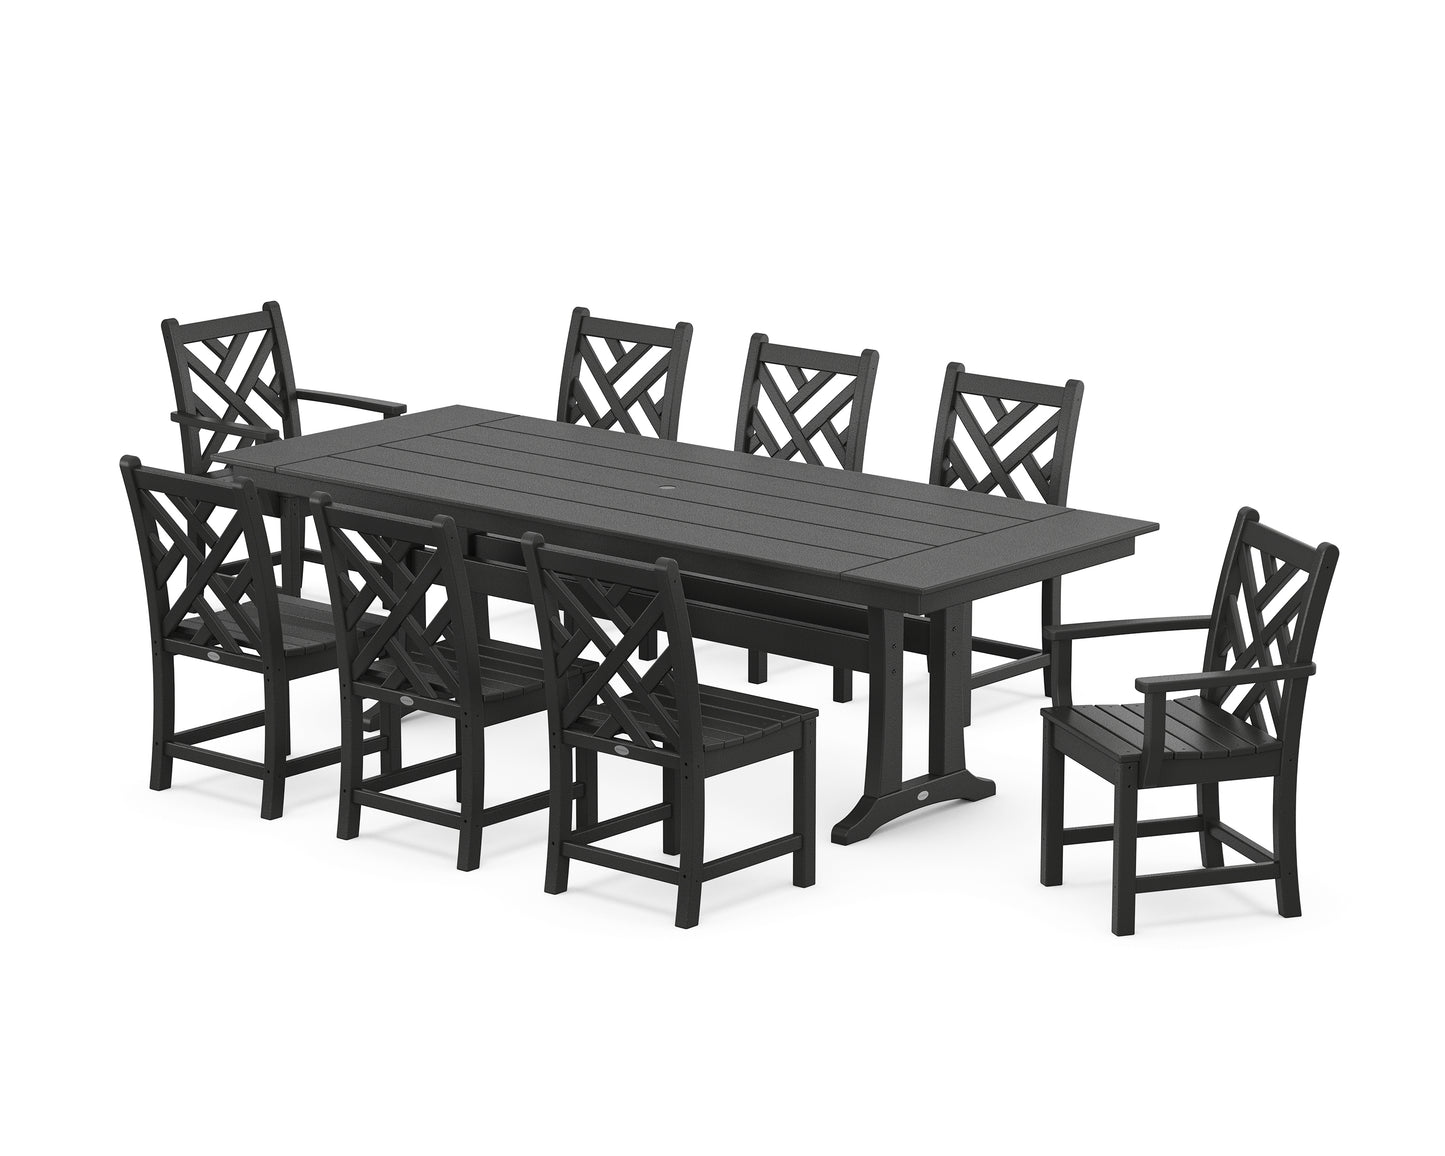 Chippendale 9-Piece Farmhouse Dining Set with Trestle Legs